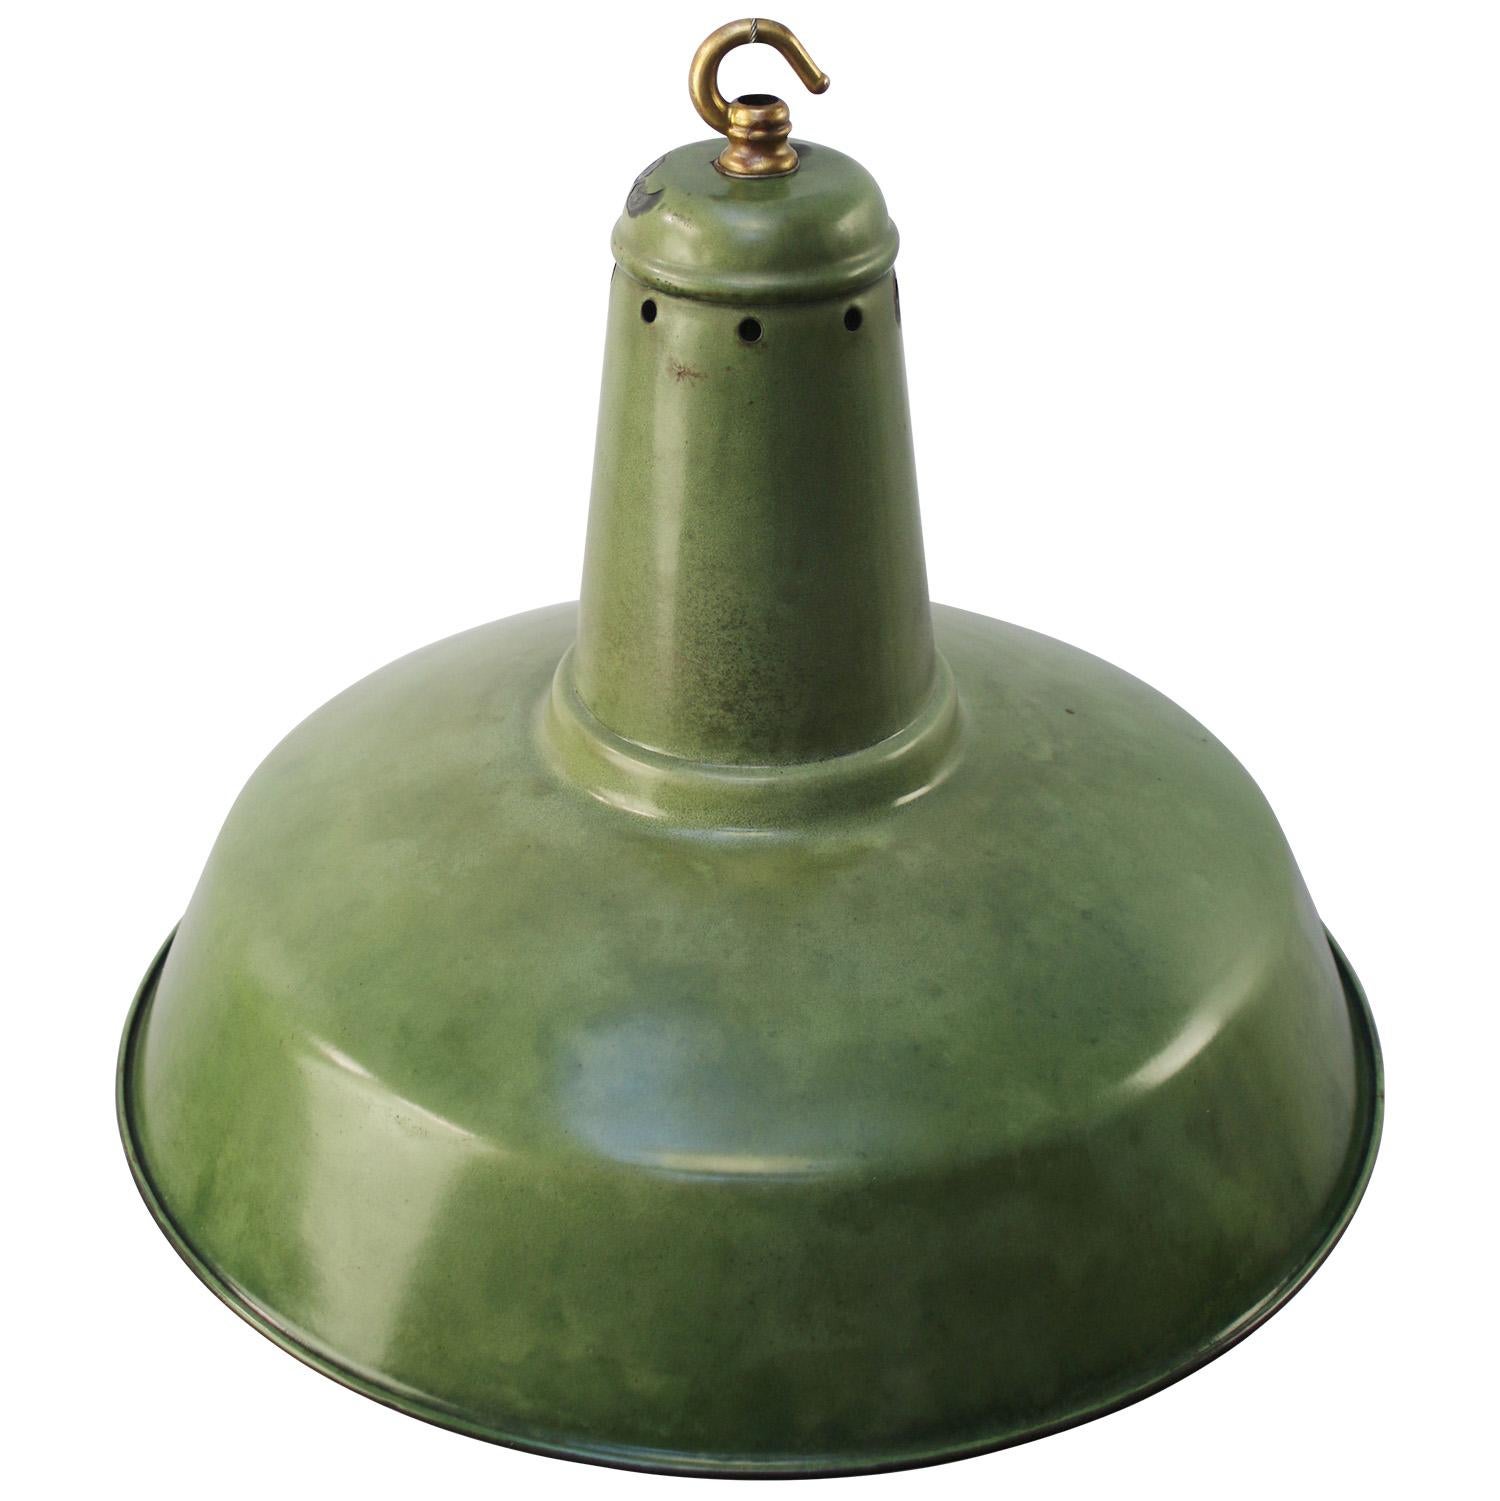 Rare Green French Enamel Factory Pendant Light
Thick quality Enamel.
Used in warehouses and factories. 

Weight: 2.00 kg / 4.4 lb

Priced per individual item. All lamps have been made suitable by international standards for incandescent light bulbs,